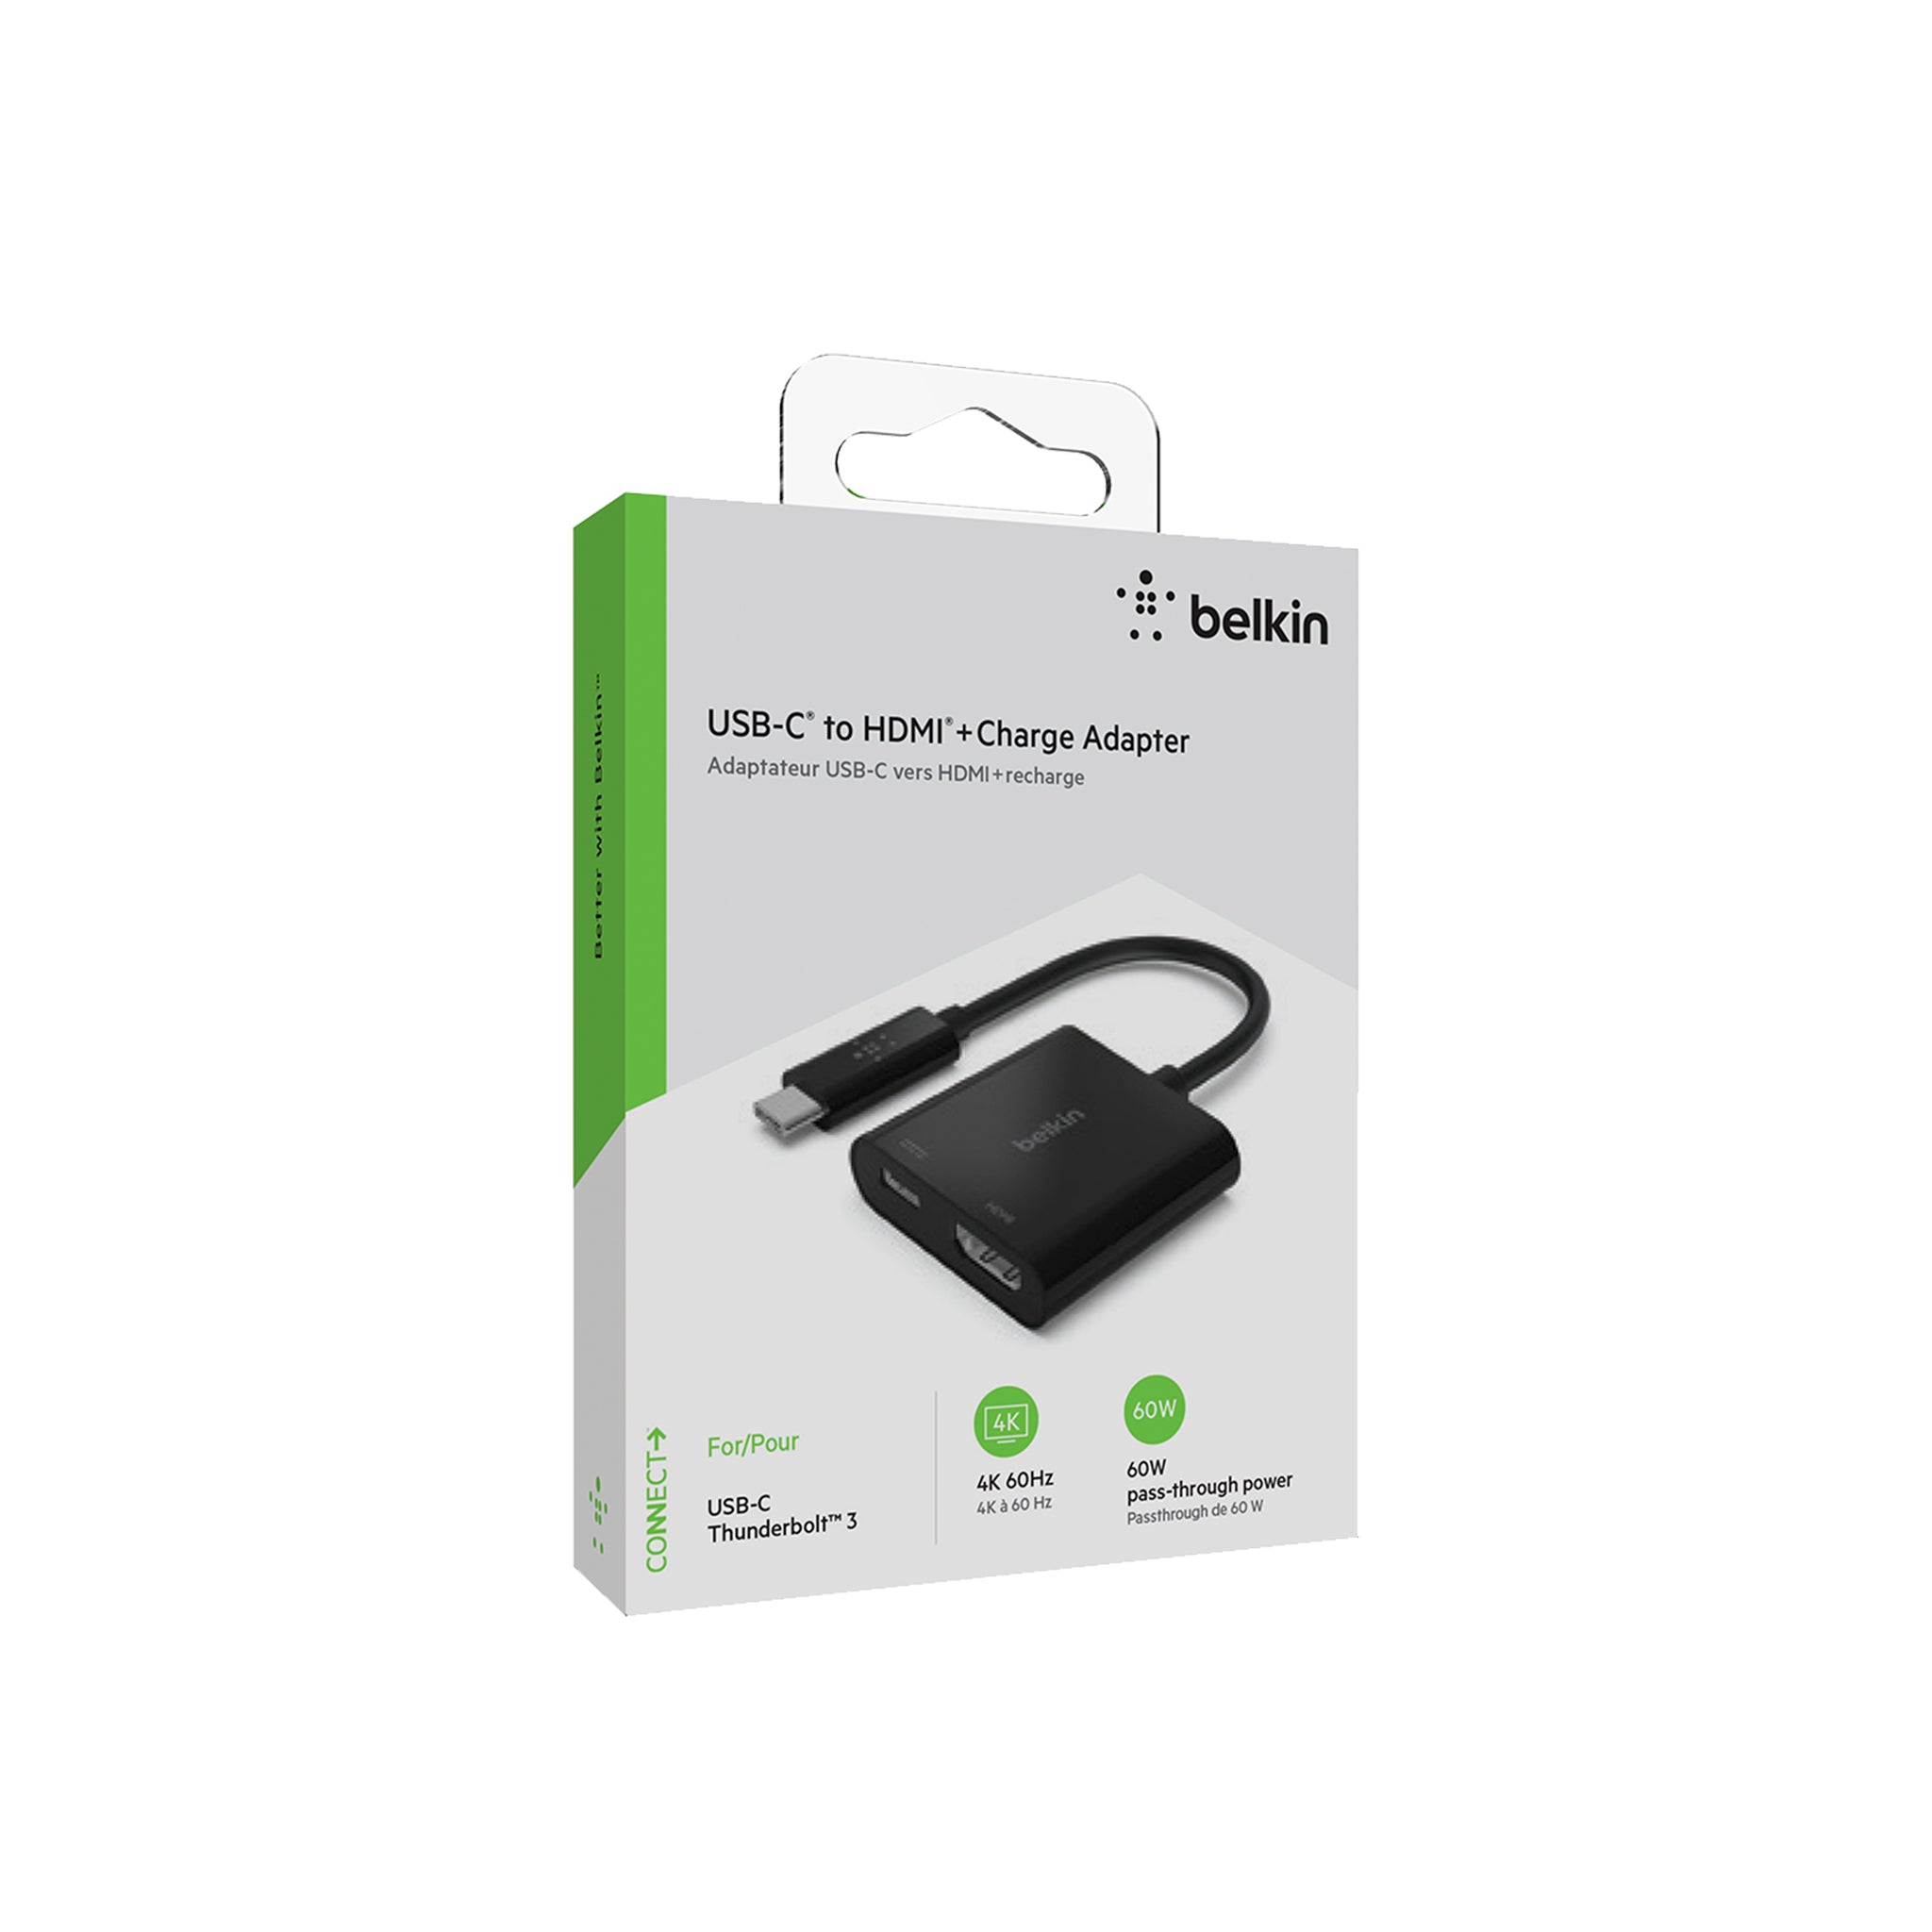 Belkin - Usb C To Hdmi And Charge Adapter 60w - Black